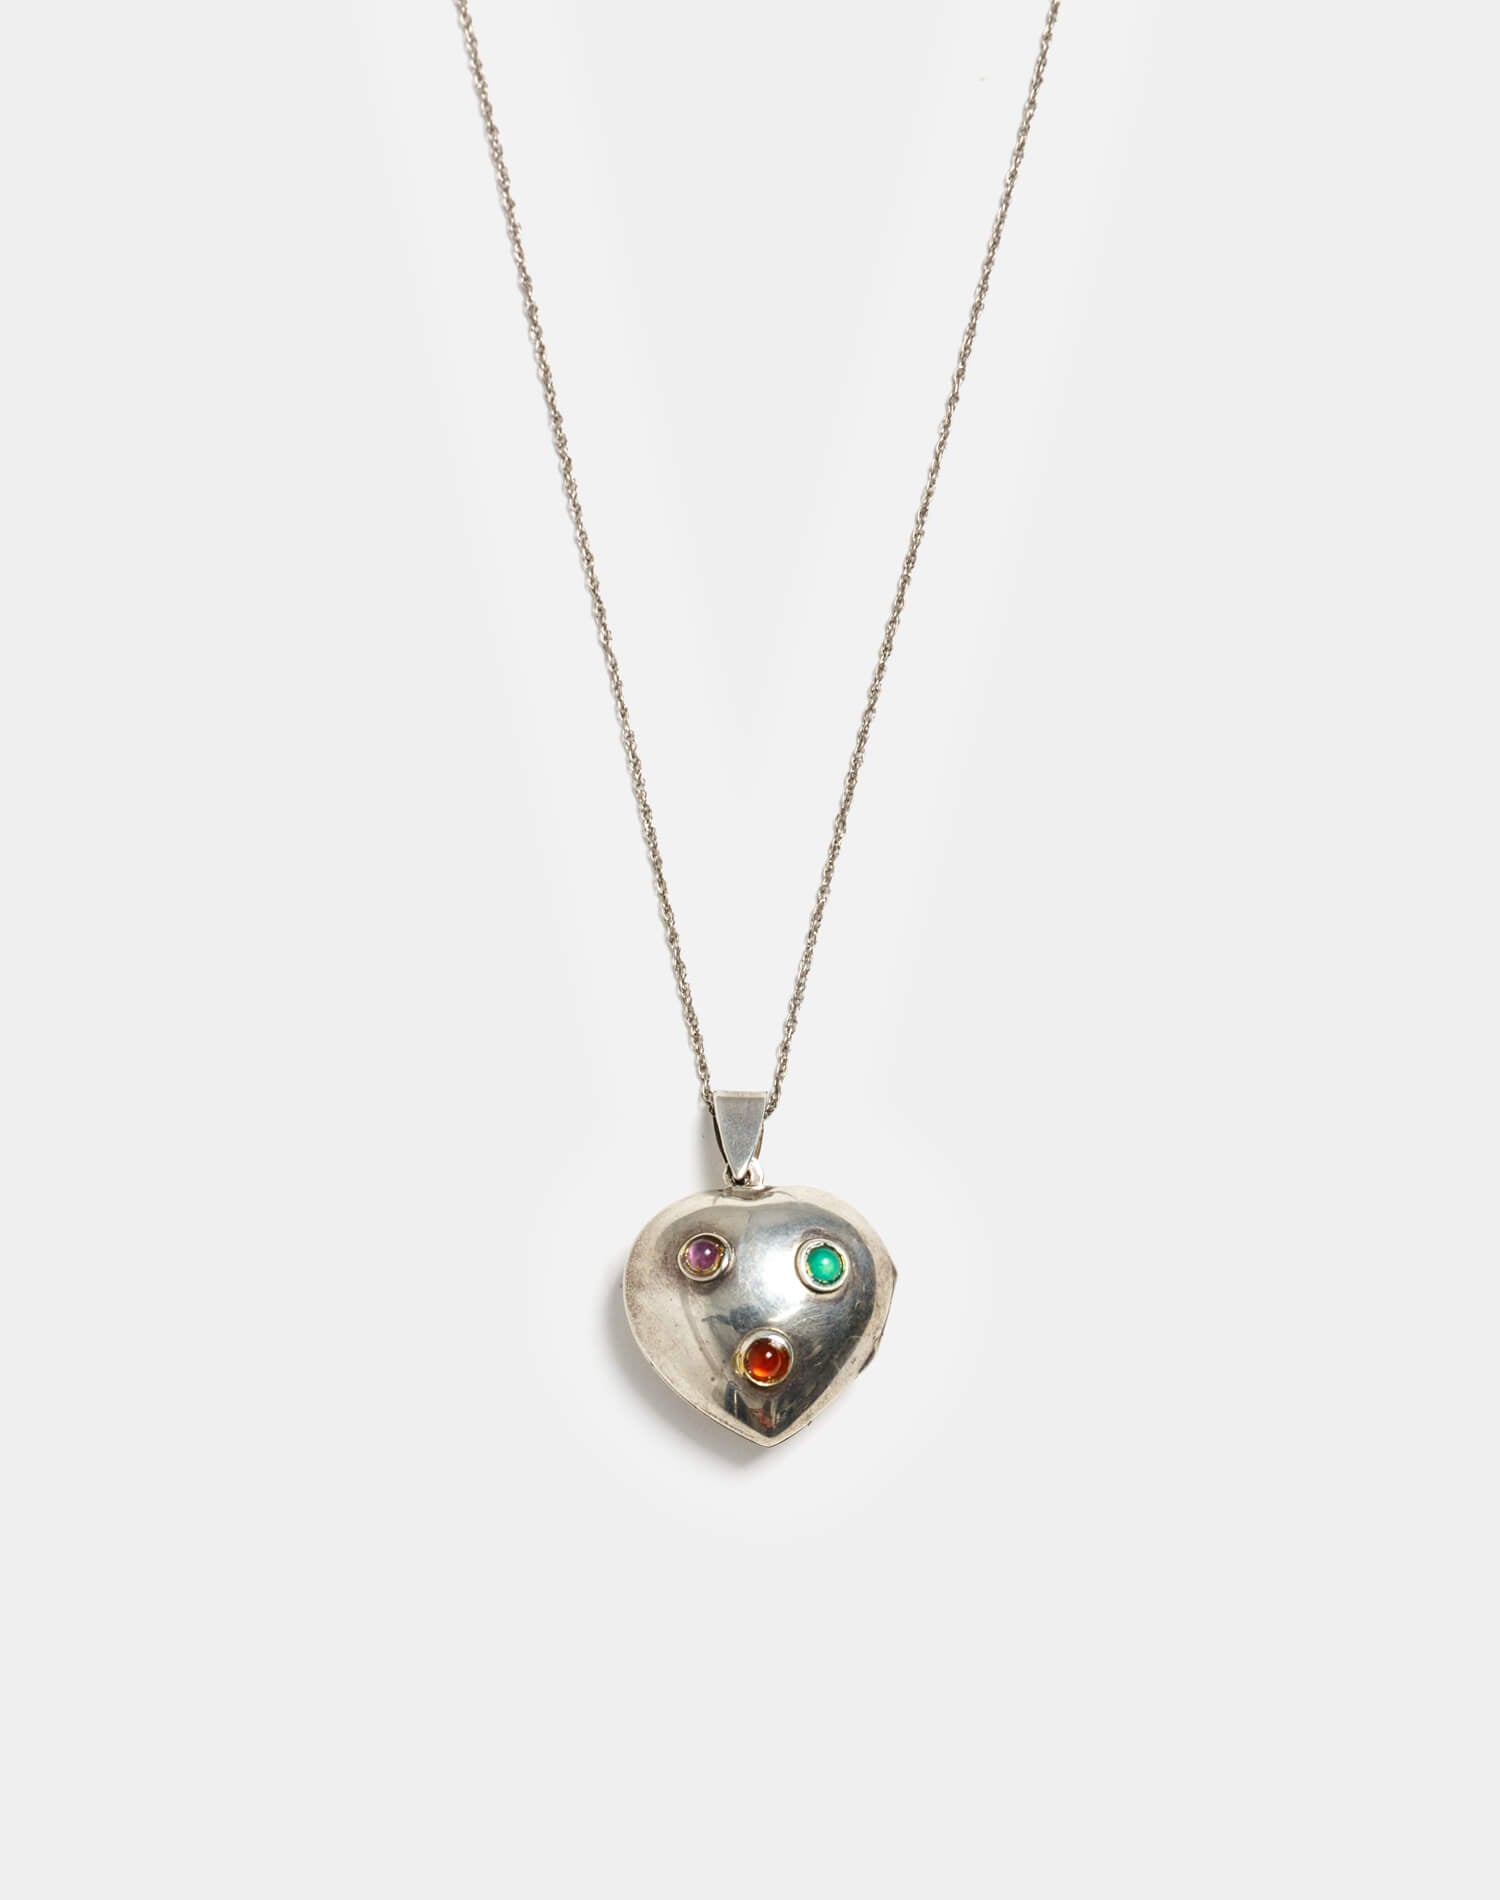 40s Sterling Heart with Glass Cabochons Necklace